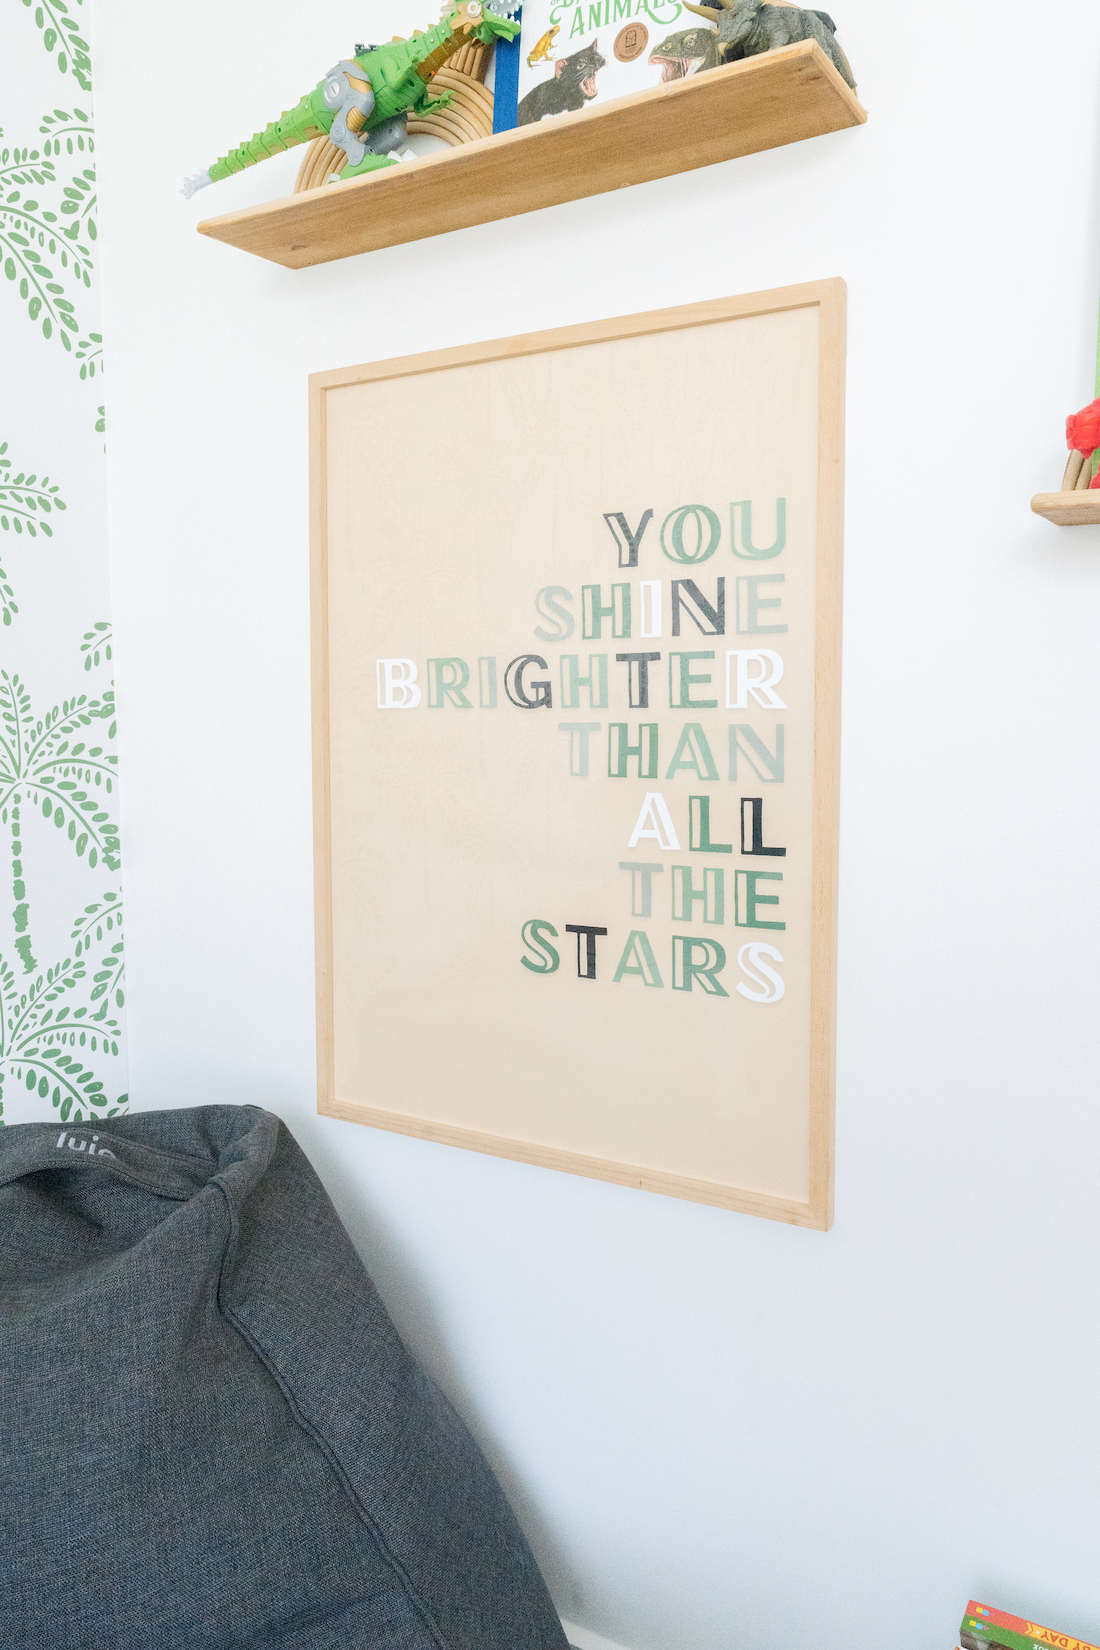 Kids poster positive message is a cheap way to decorate boy's bedroom design